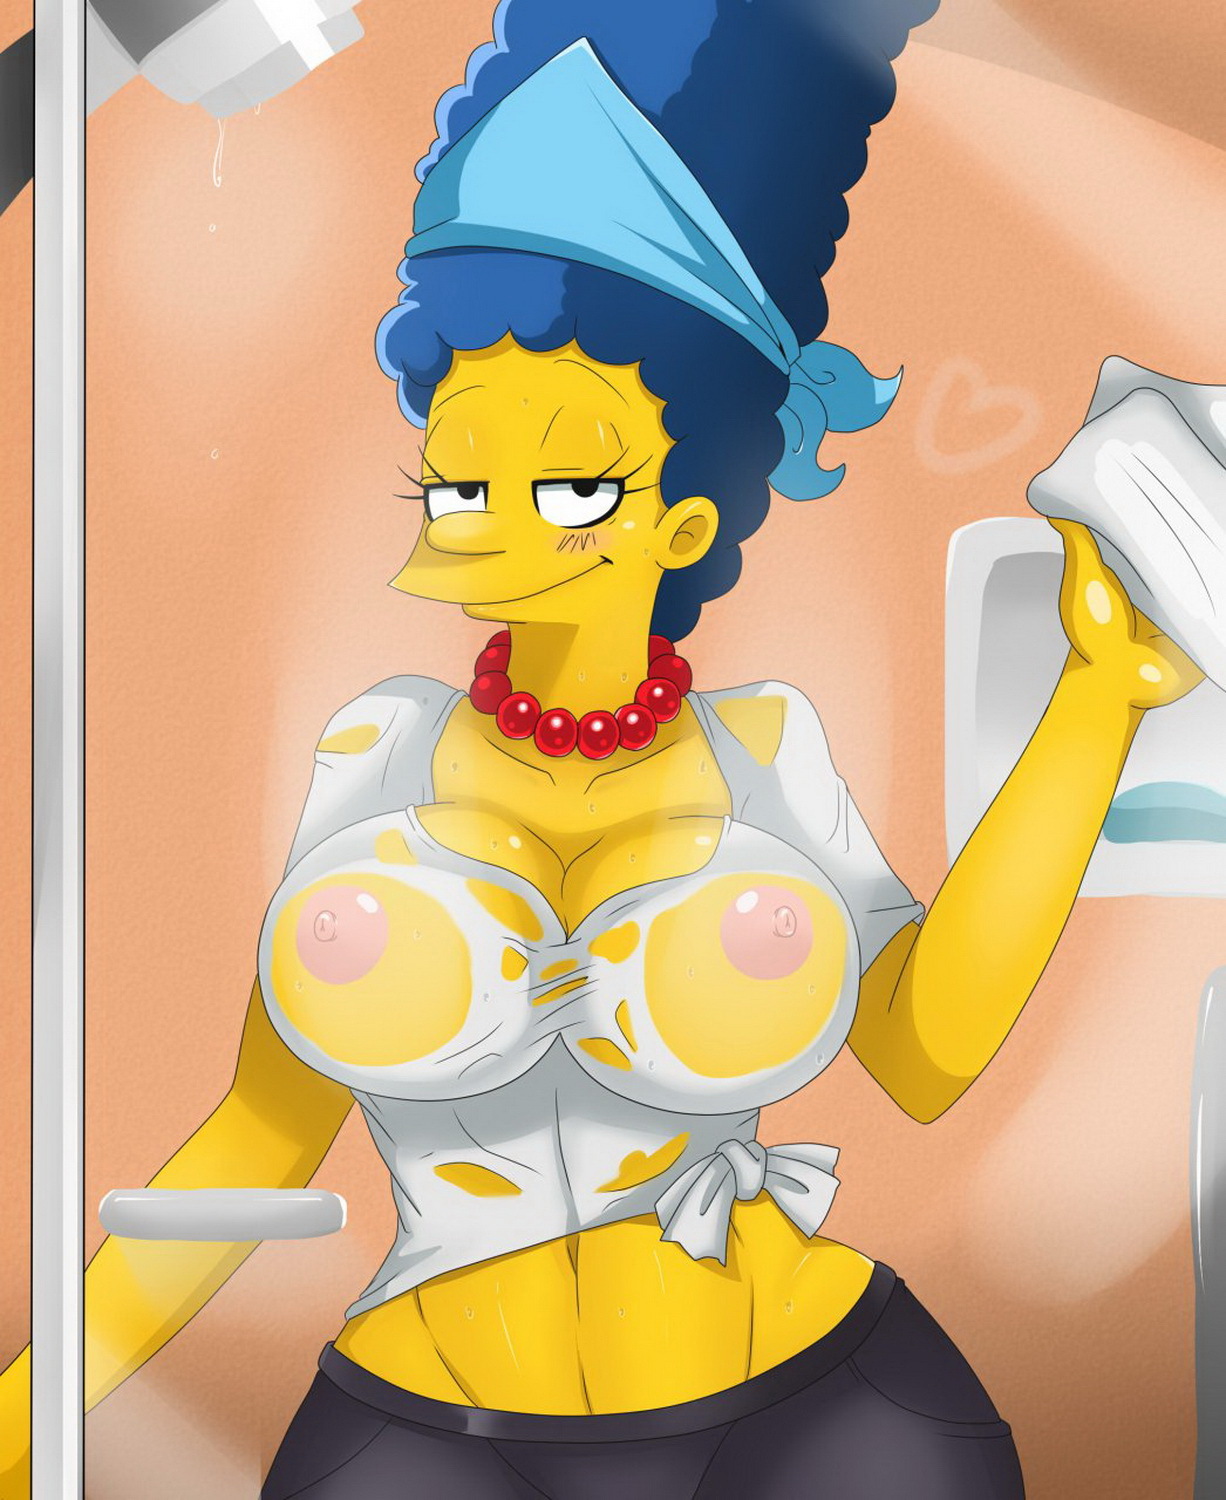 Mother Colette Choisez and Marge Simpson Toon Milf